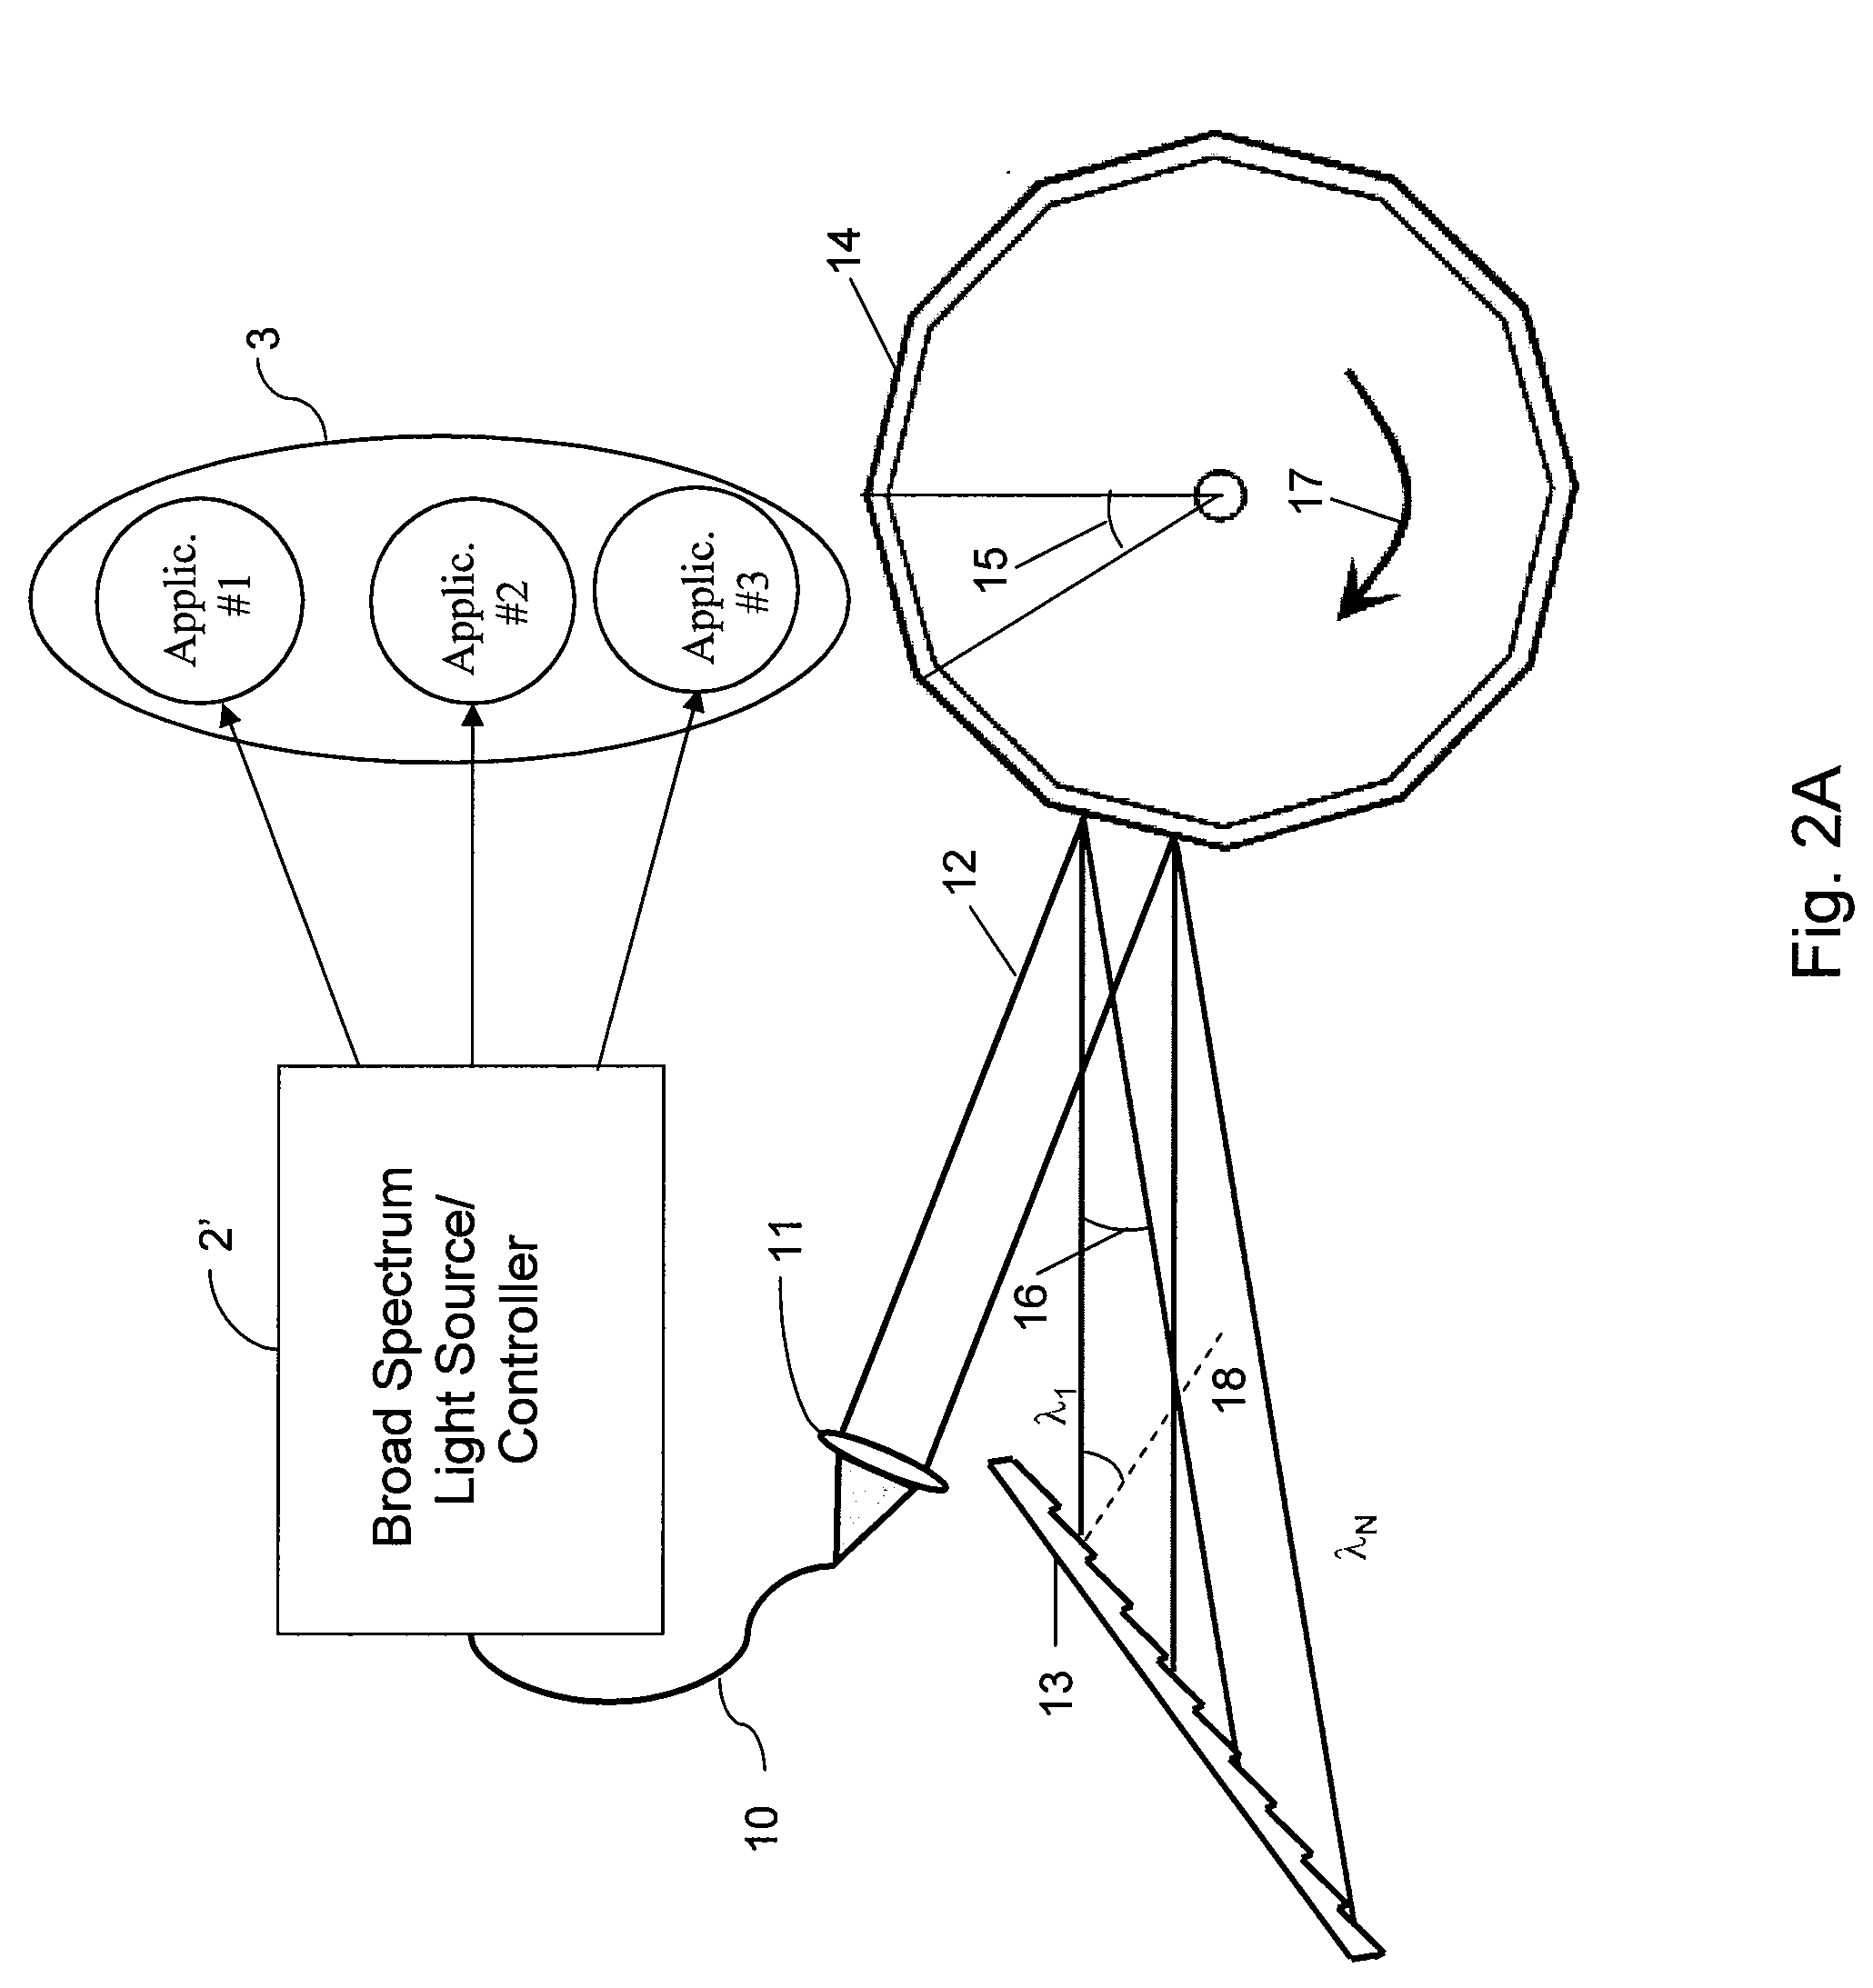 Methods, arrangements and apparatus for utilizing a wavelength-swept laser using angular scanning and dispersion procedures